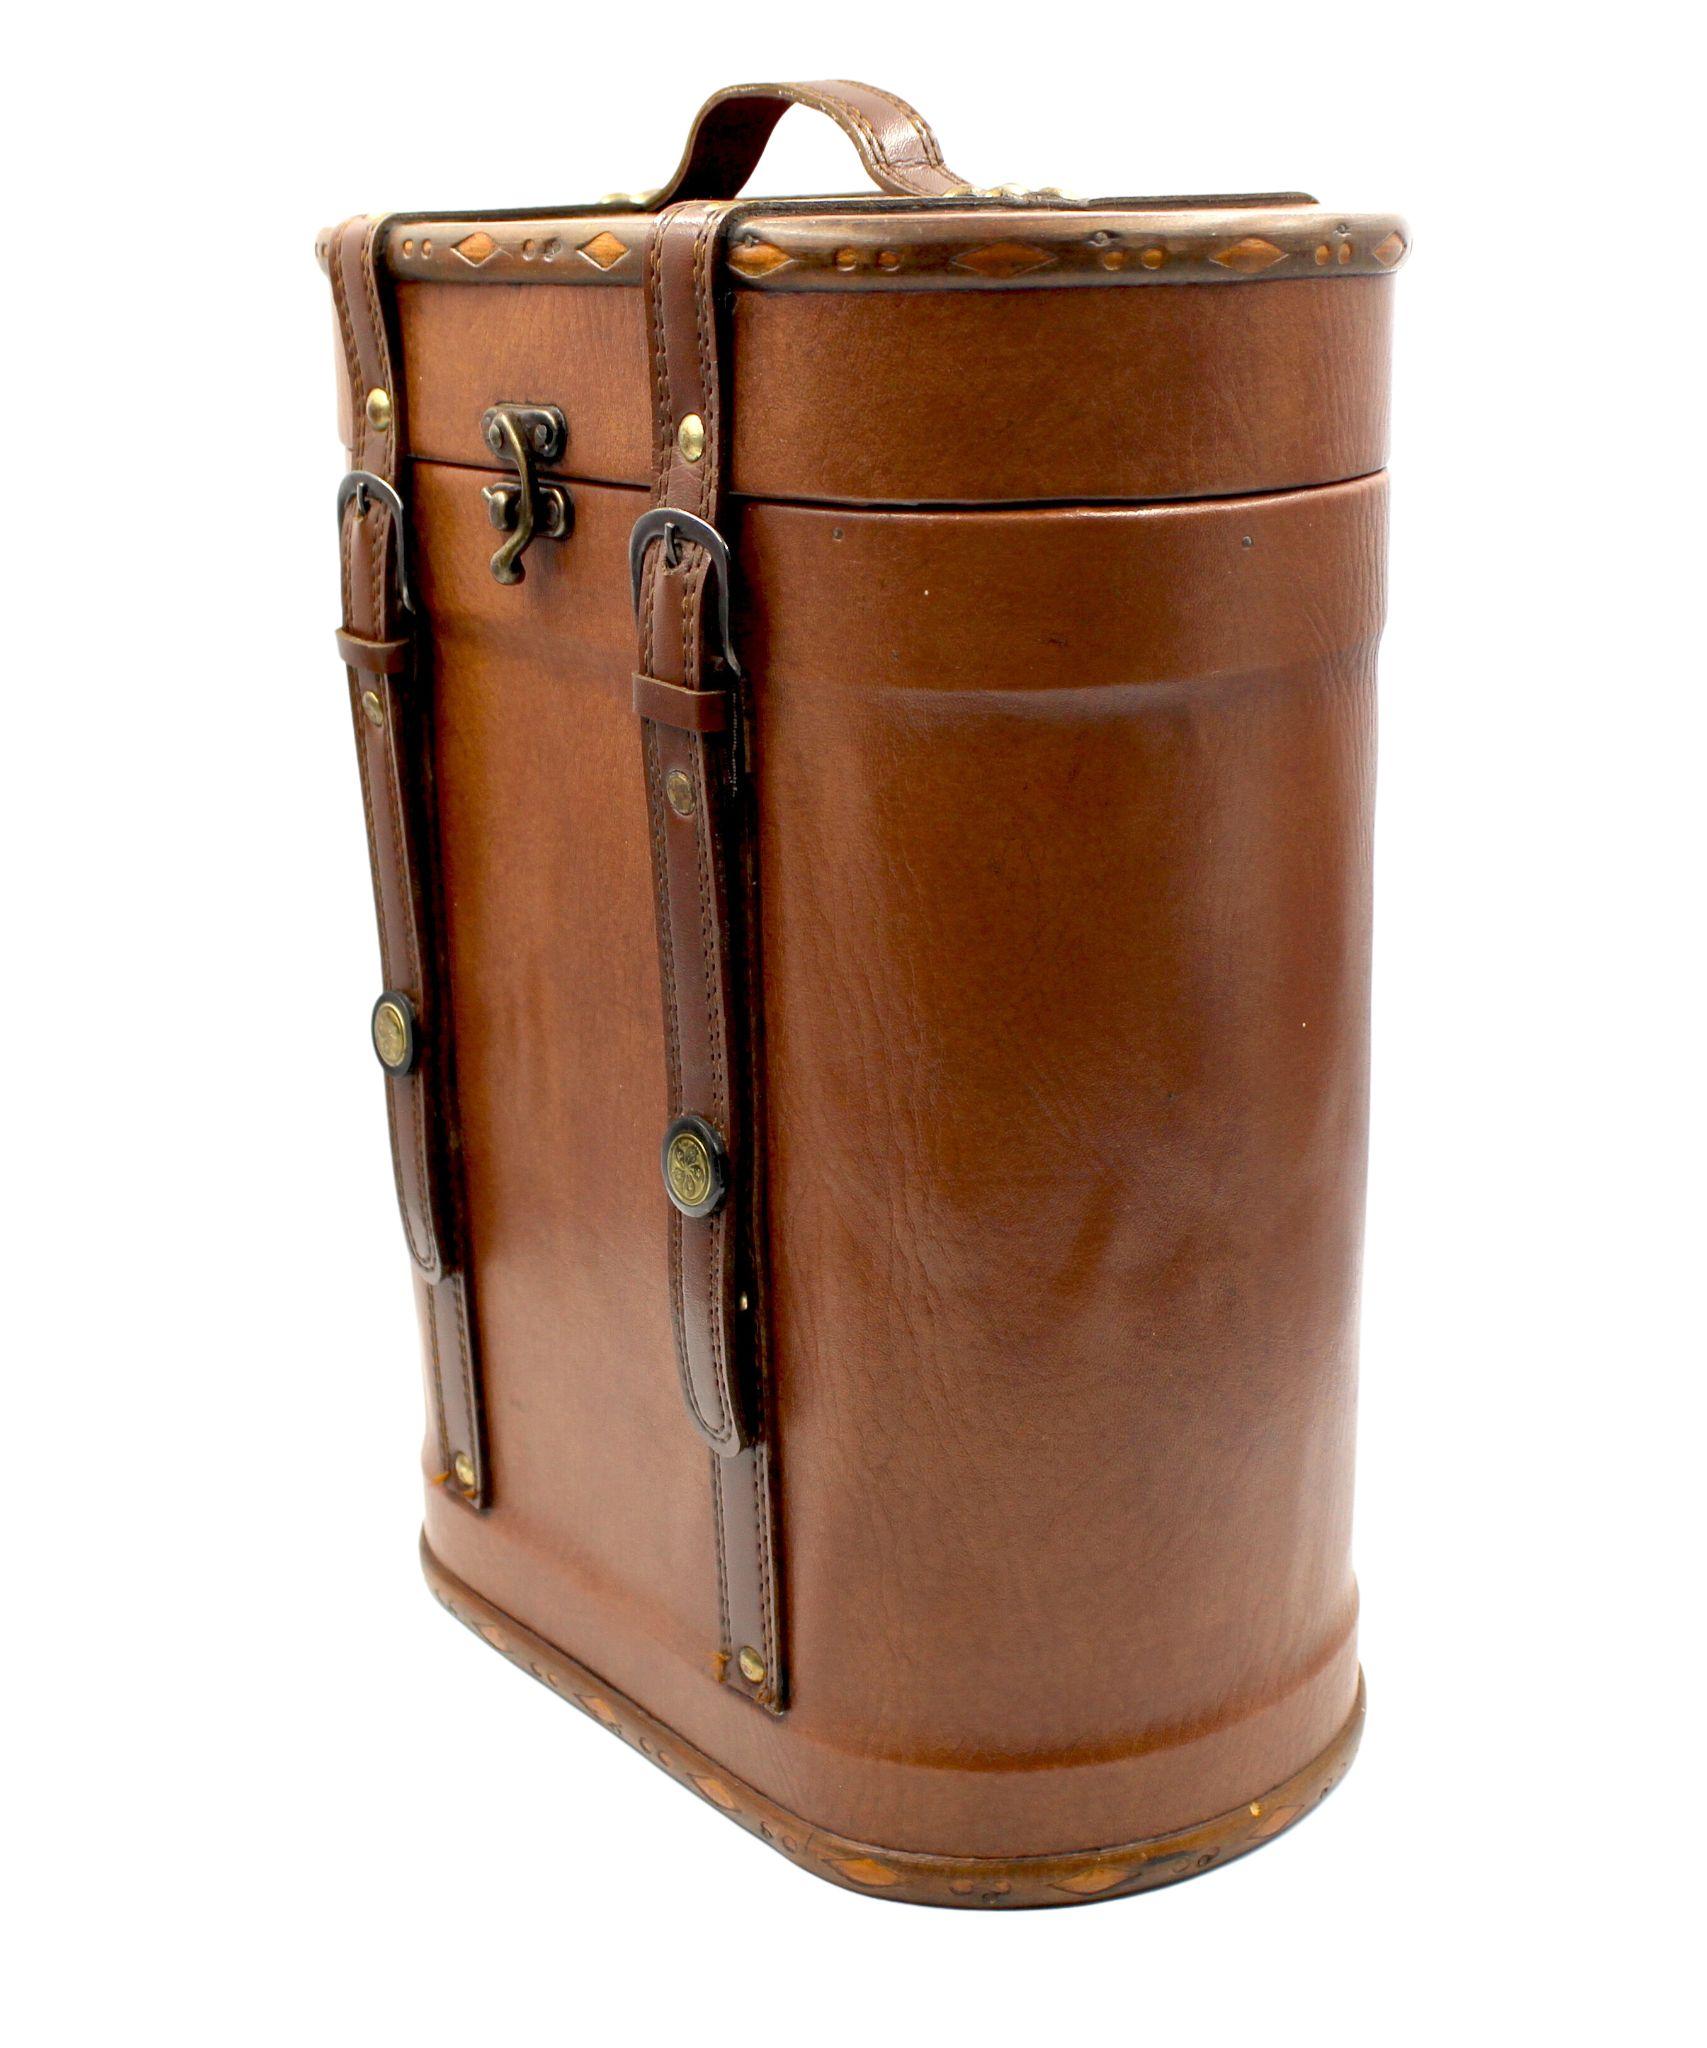 Presented is a vintage leather and wood wine carrier from the 20th century. This carrier is a stylish way to carry two bottles of wine to a picnic or dinner. It also makes great decorative storage around the house for bottles being saved for a